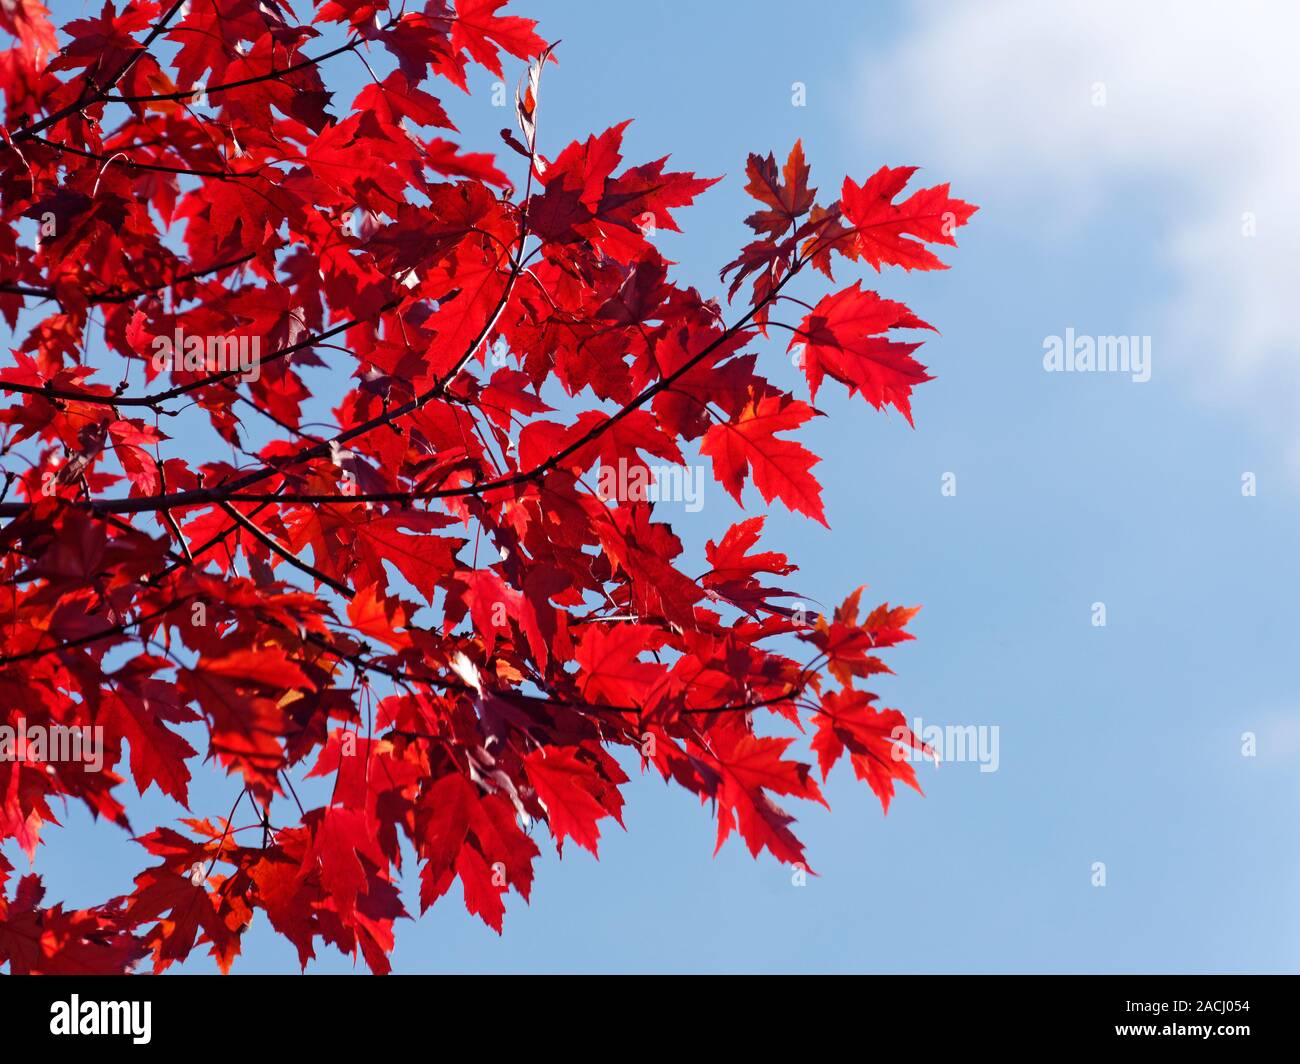 Backlit red maple tree leaves against a blue sky in autumn Stock Photo